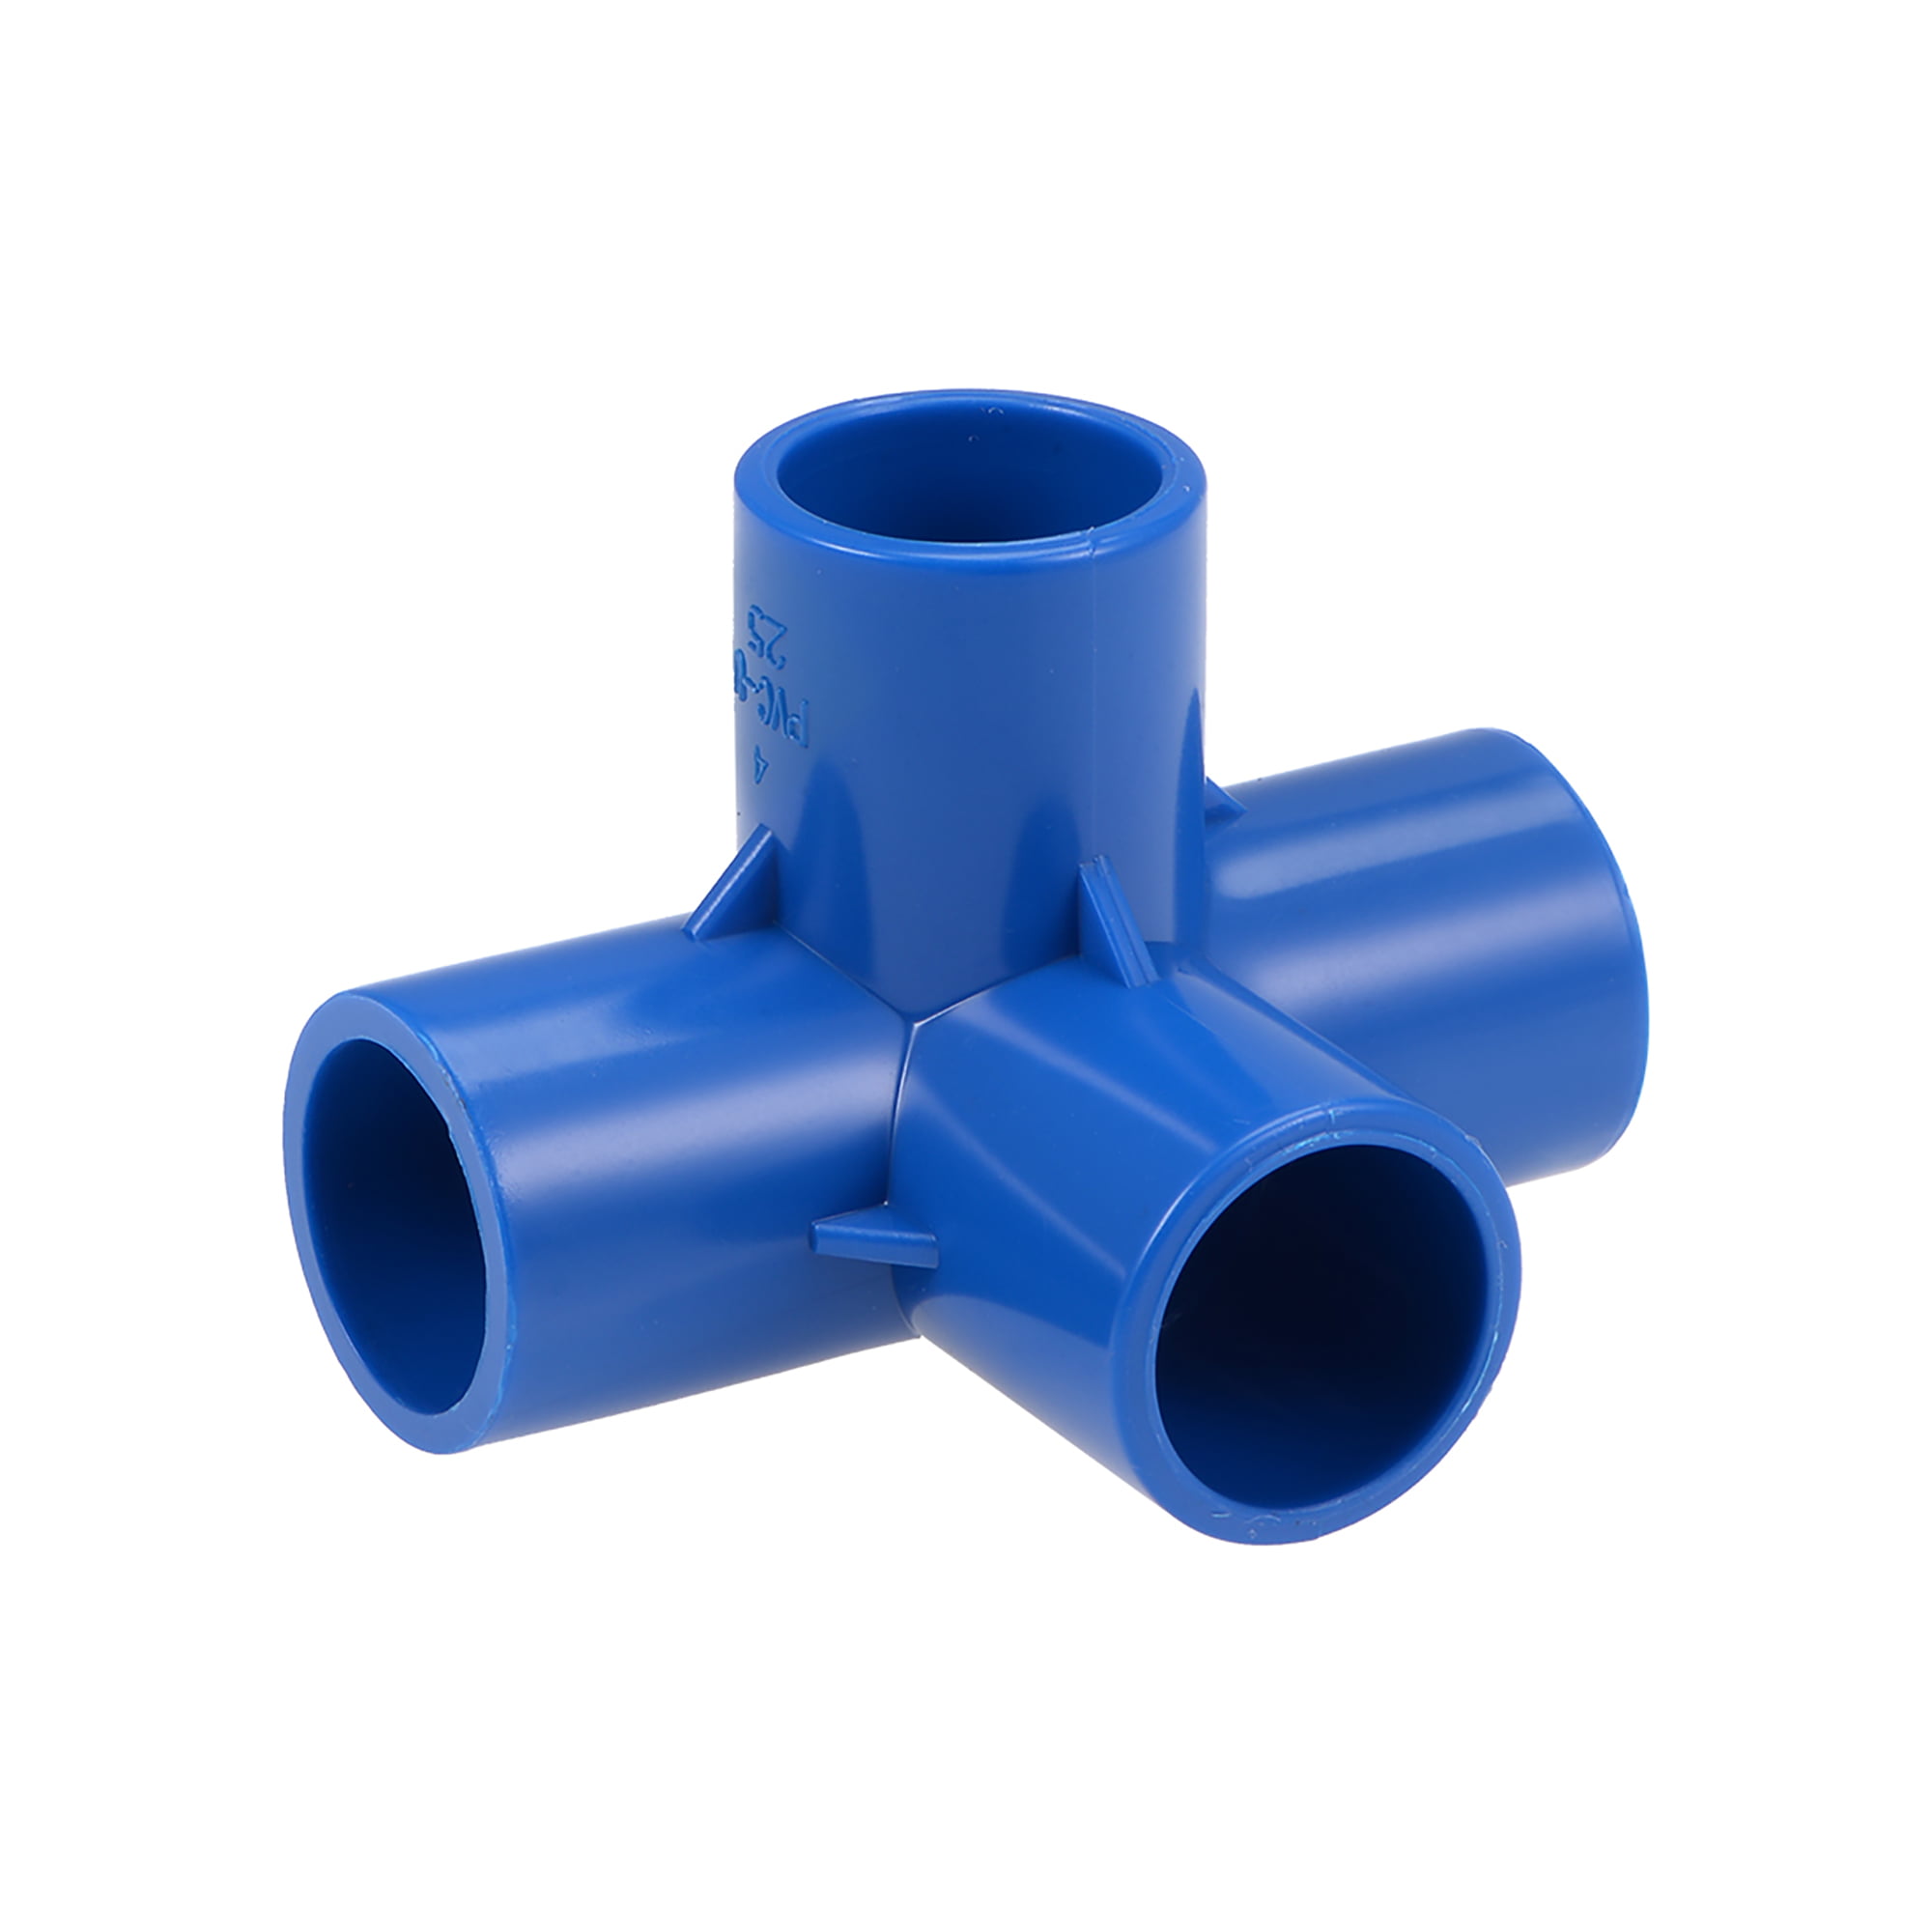 4Way Elbow PVC Pipe Fitting,Furniture Grade,3/4inch Size